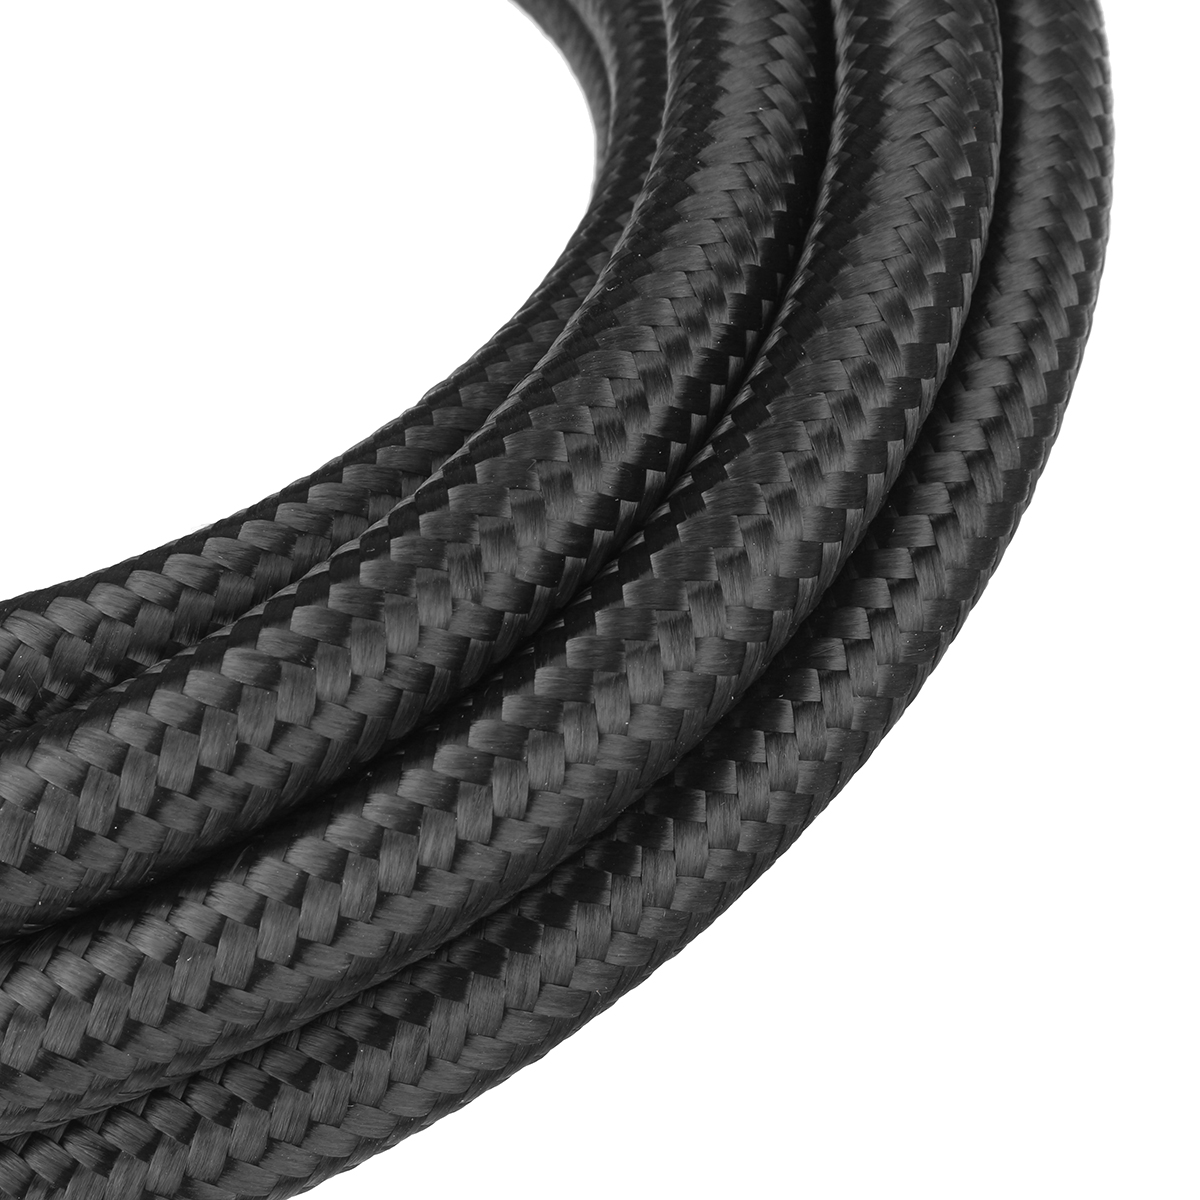 20FT-AN6-AN8-Fuel-Hose-Oil-Gas-Line-Nylon-Stainless-Steel-Braided-Silver-Black-1683239-9